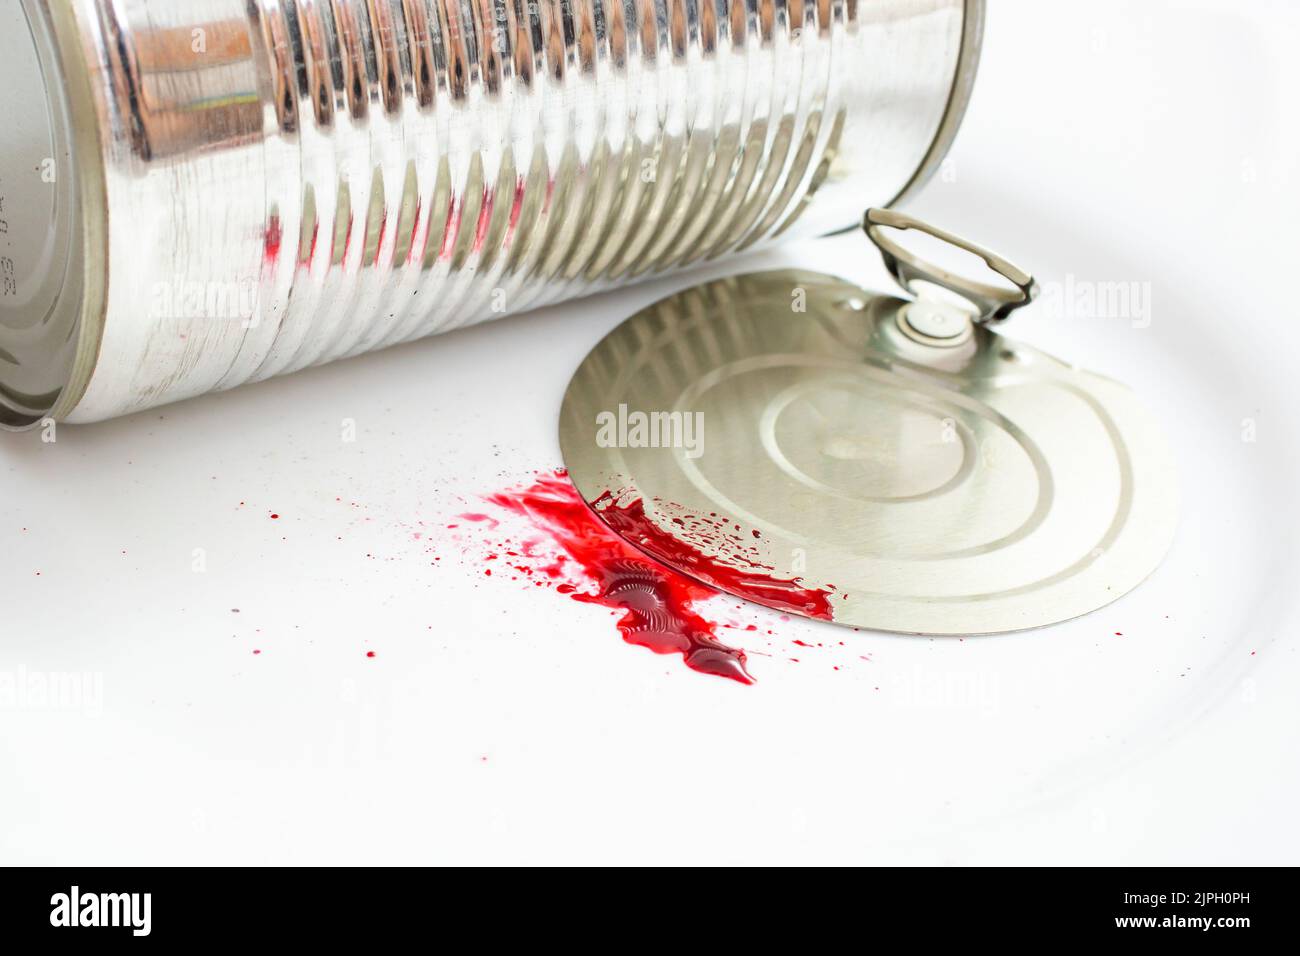 Aluminum tin can with blood splatter on white background, domestic injury  concept, close up Stock Photo